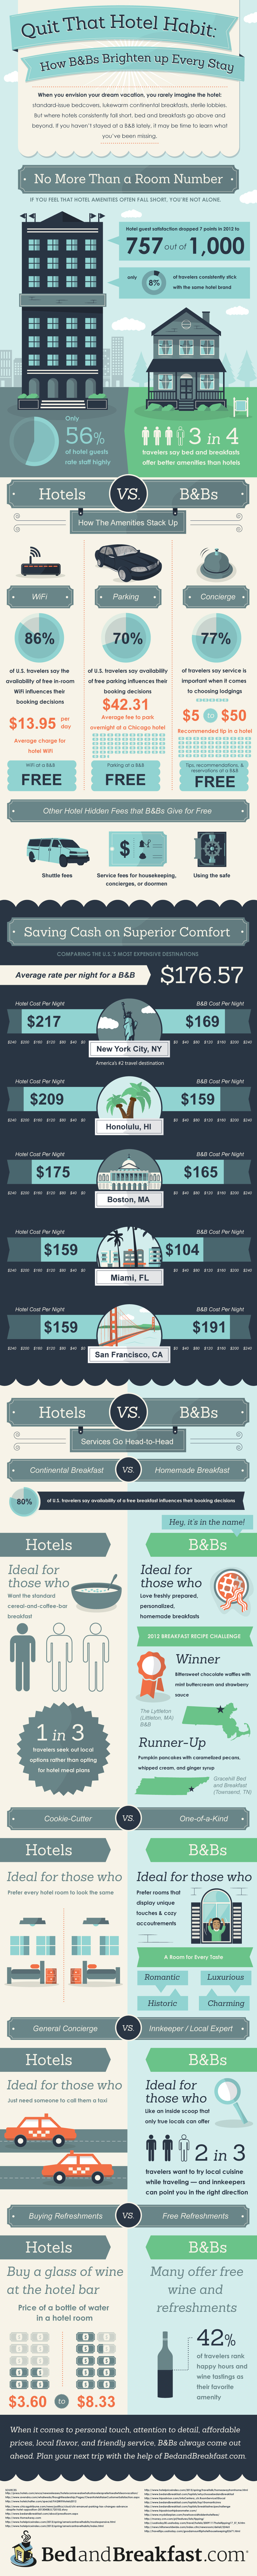 hotels vs bed and breakfast